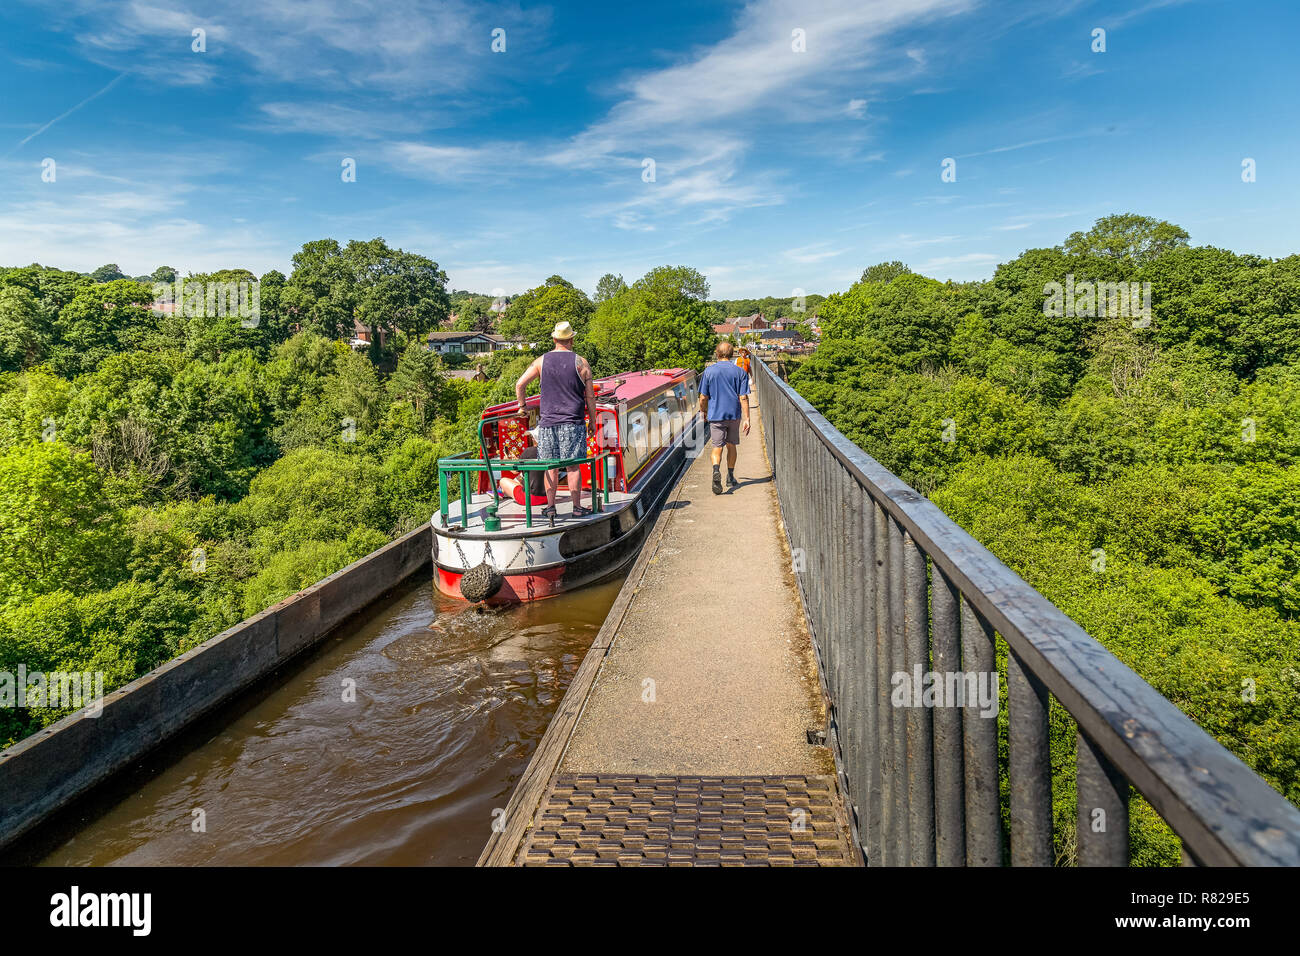 A barge, or Narrow Boat, crossing the Pontcysyllte Aqueduct near Llangollen in Wales.It carried the Llangollen canal across the River Dee. Stock Photo